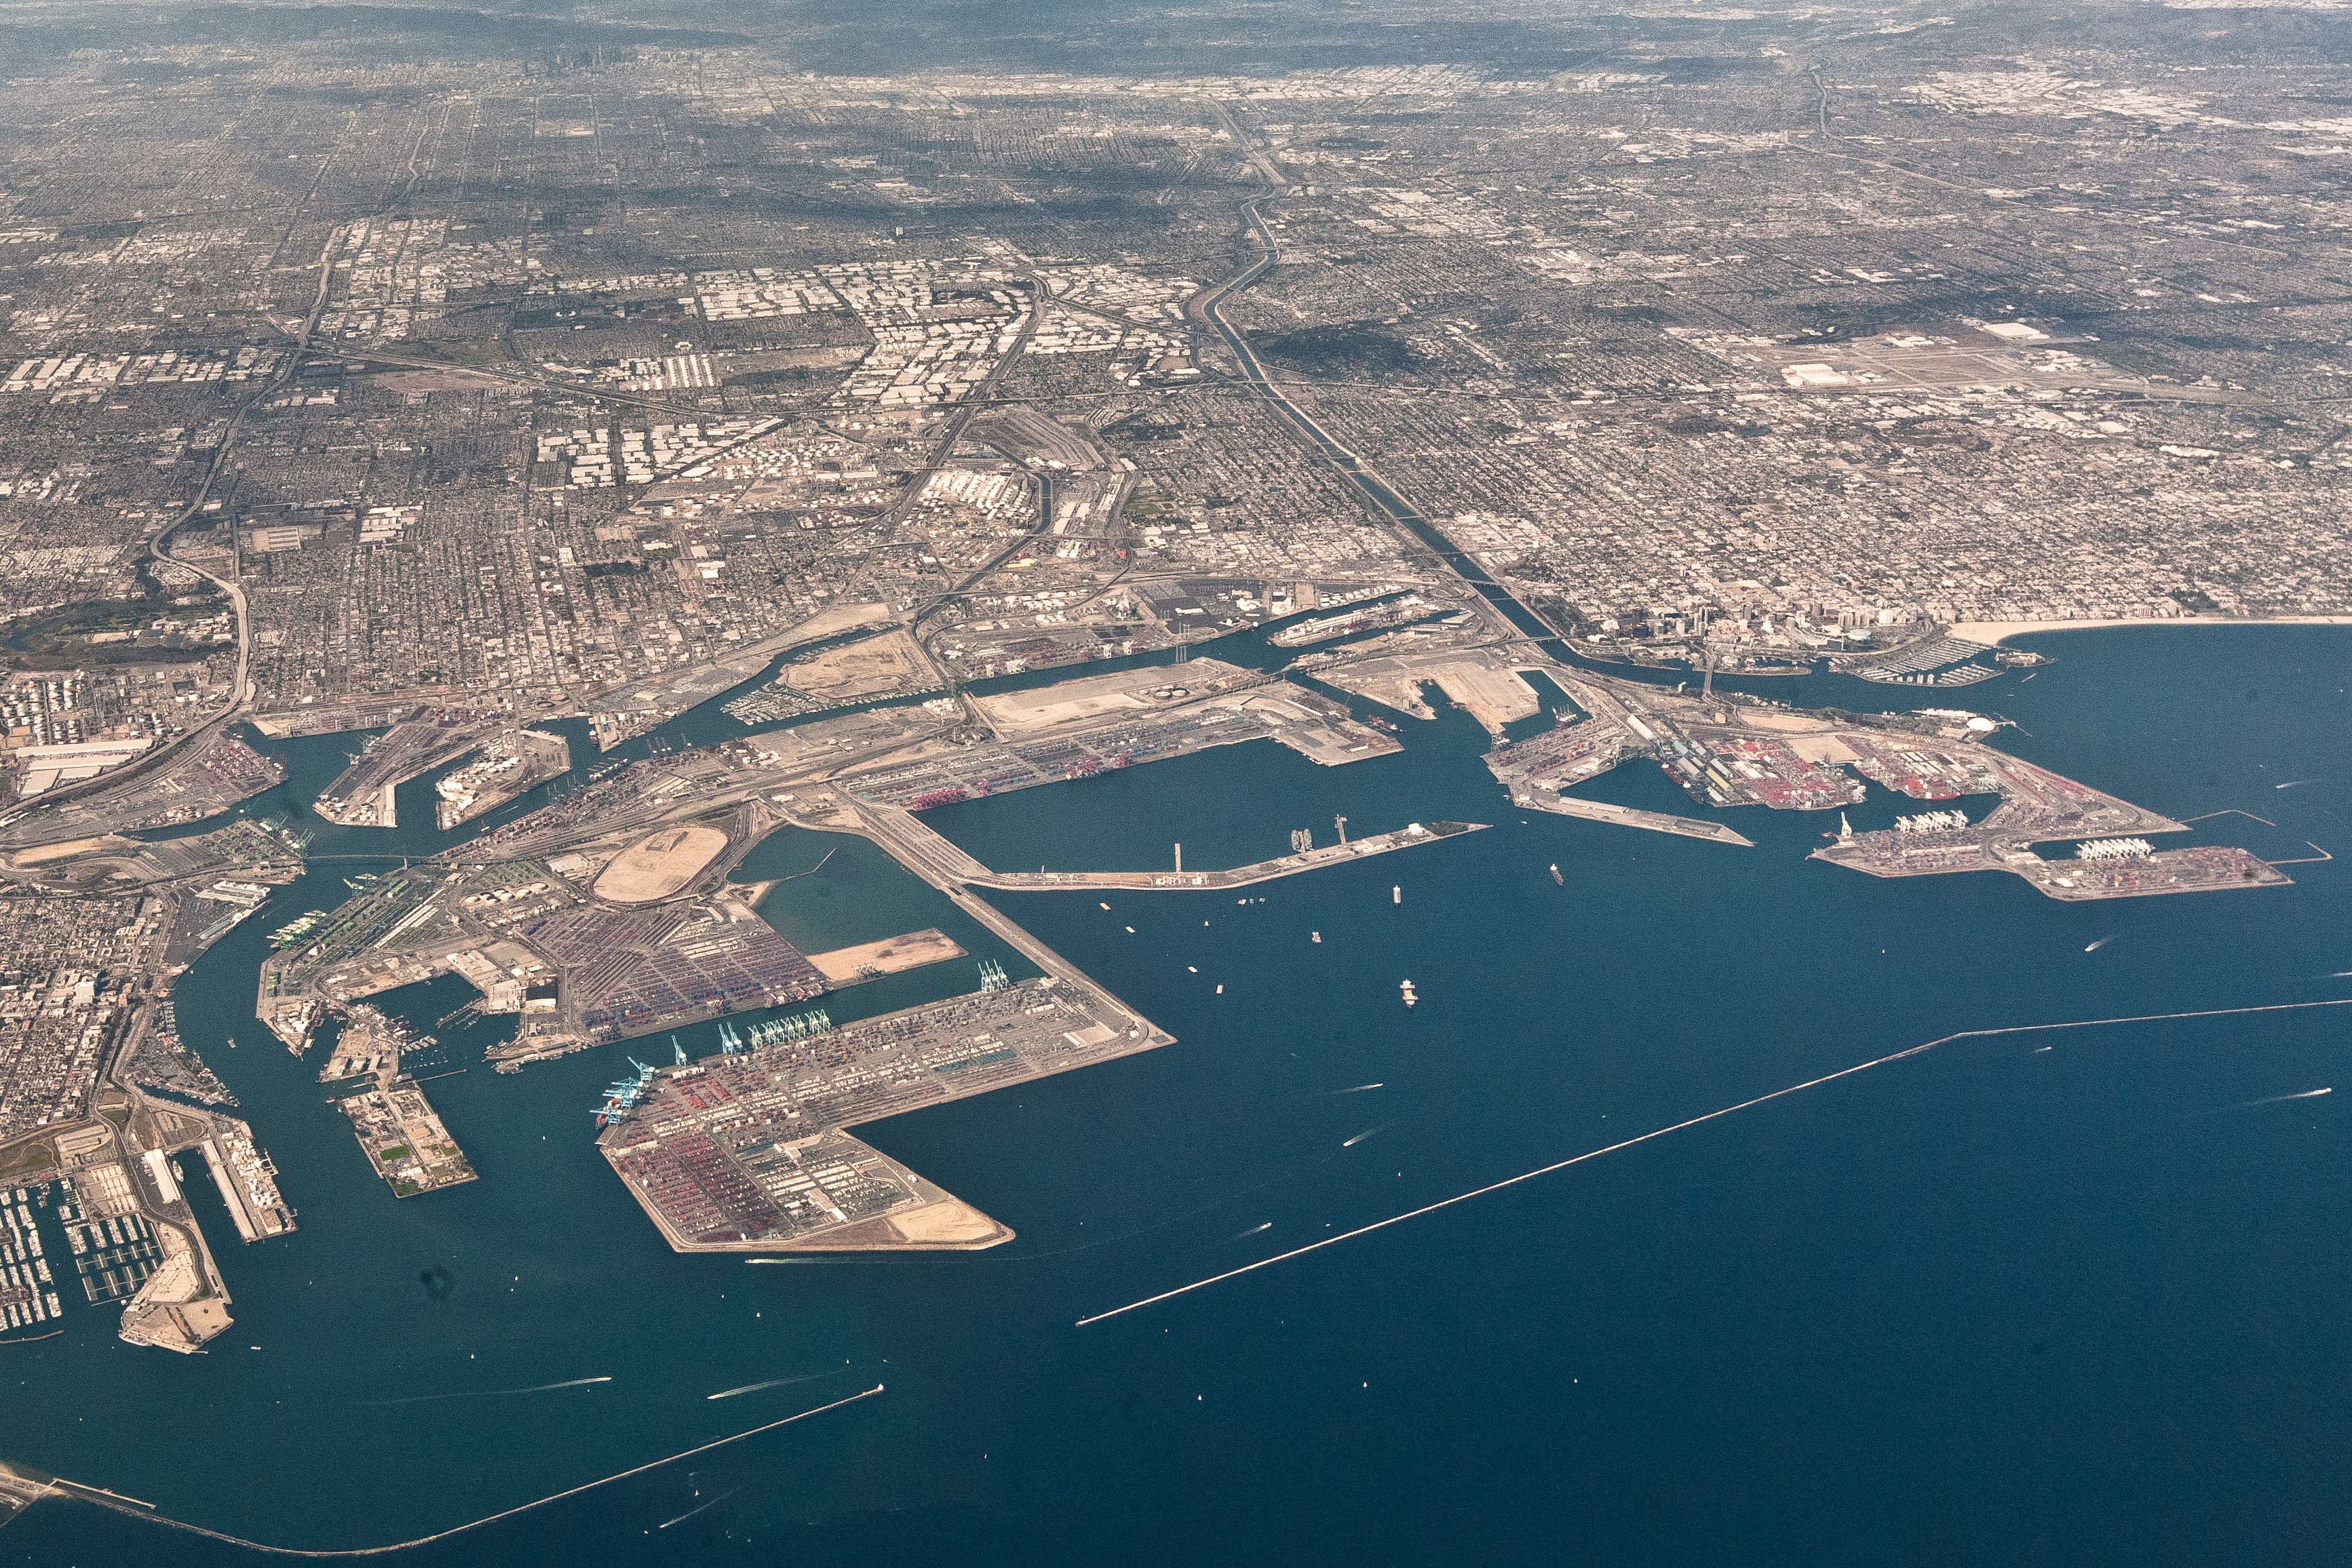 A birds-eye view of the Los Angeles shoreline. Two massive container yards and ports jut out in to the water, lined with many tall cranes. The sprawling urban landscape stretches into the horizon.